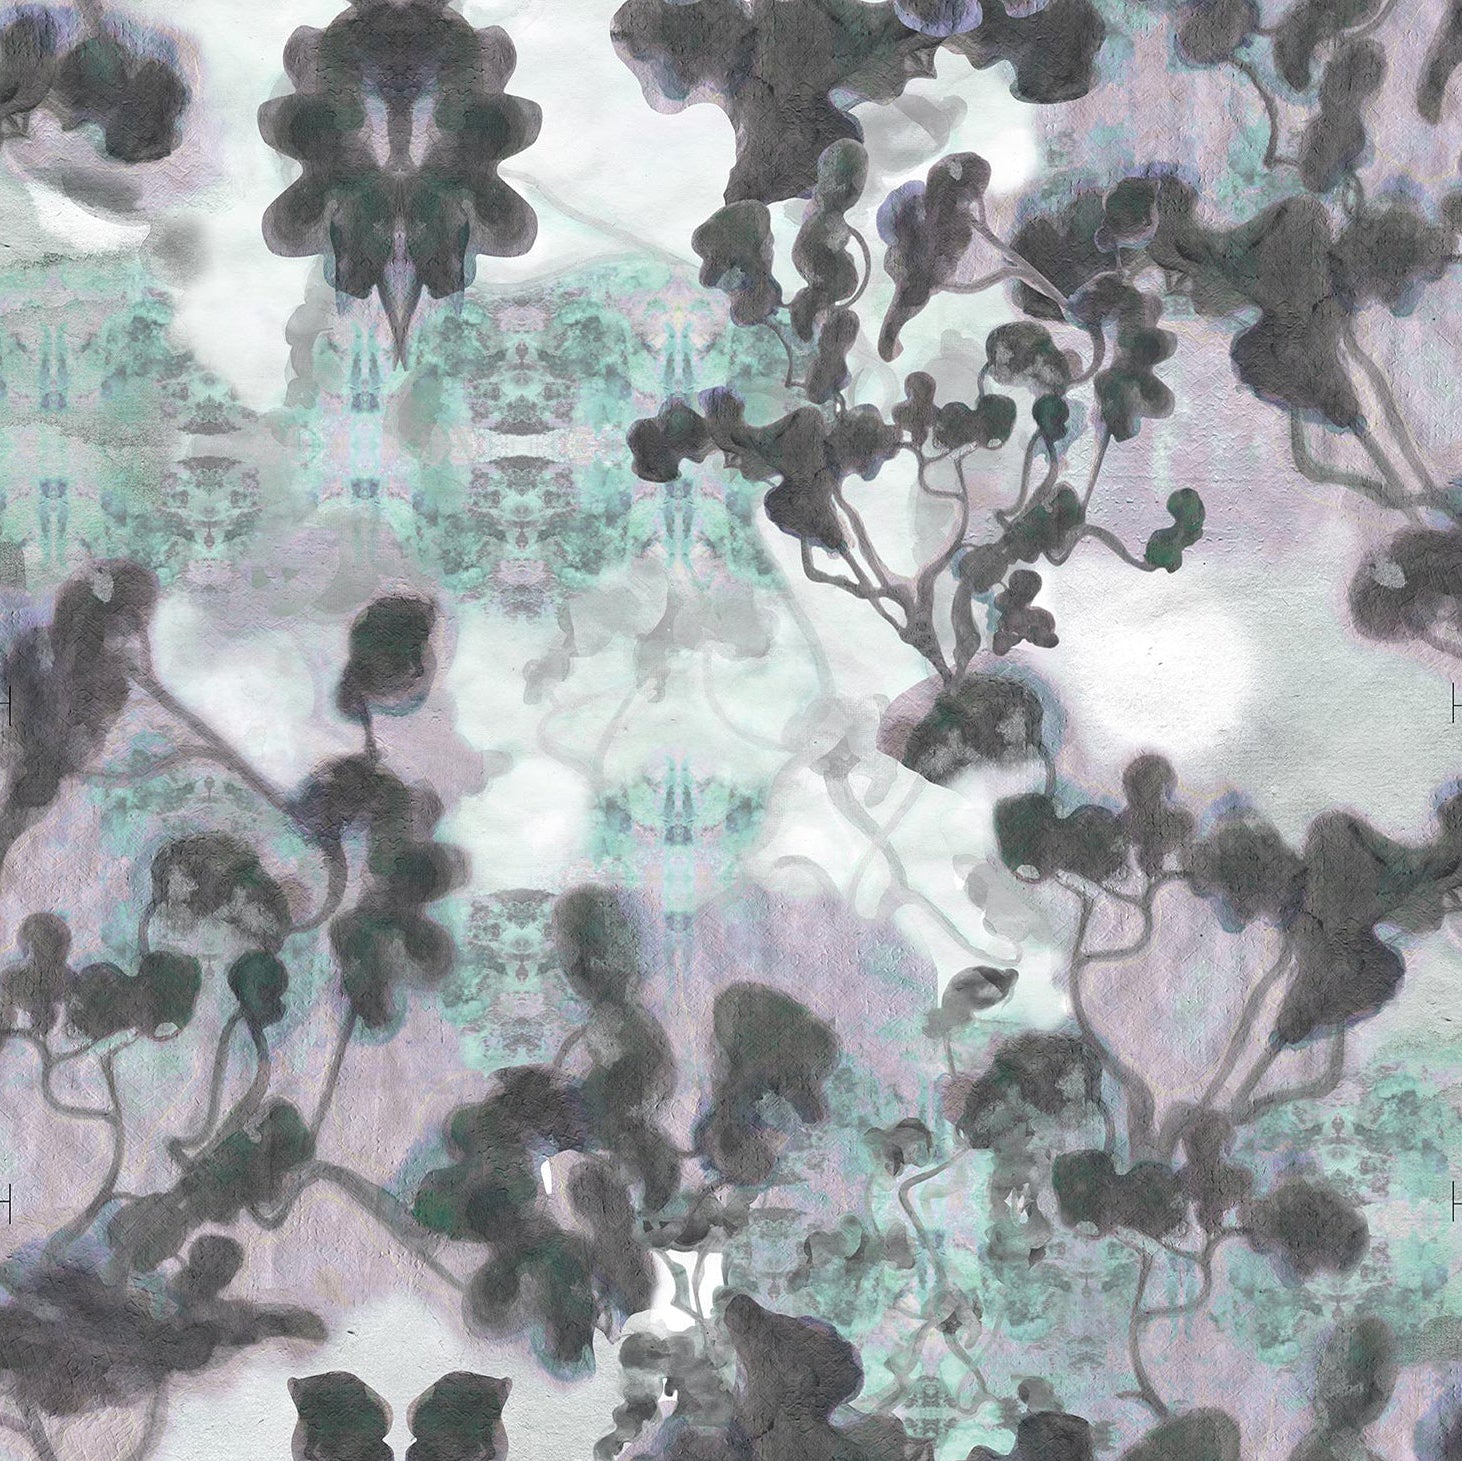 Detail of wallpaper in an abstract botanical print in gray, turquoise, purple and white.